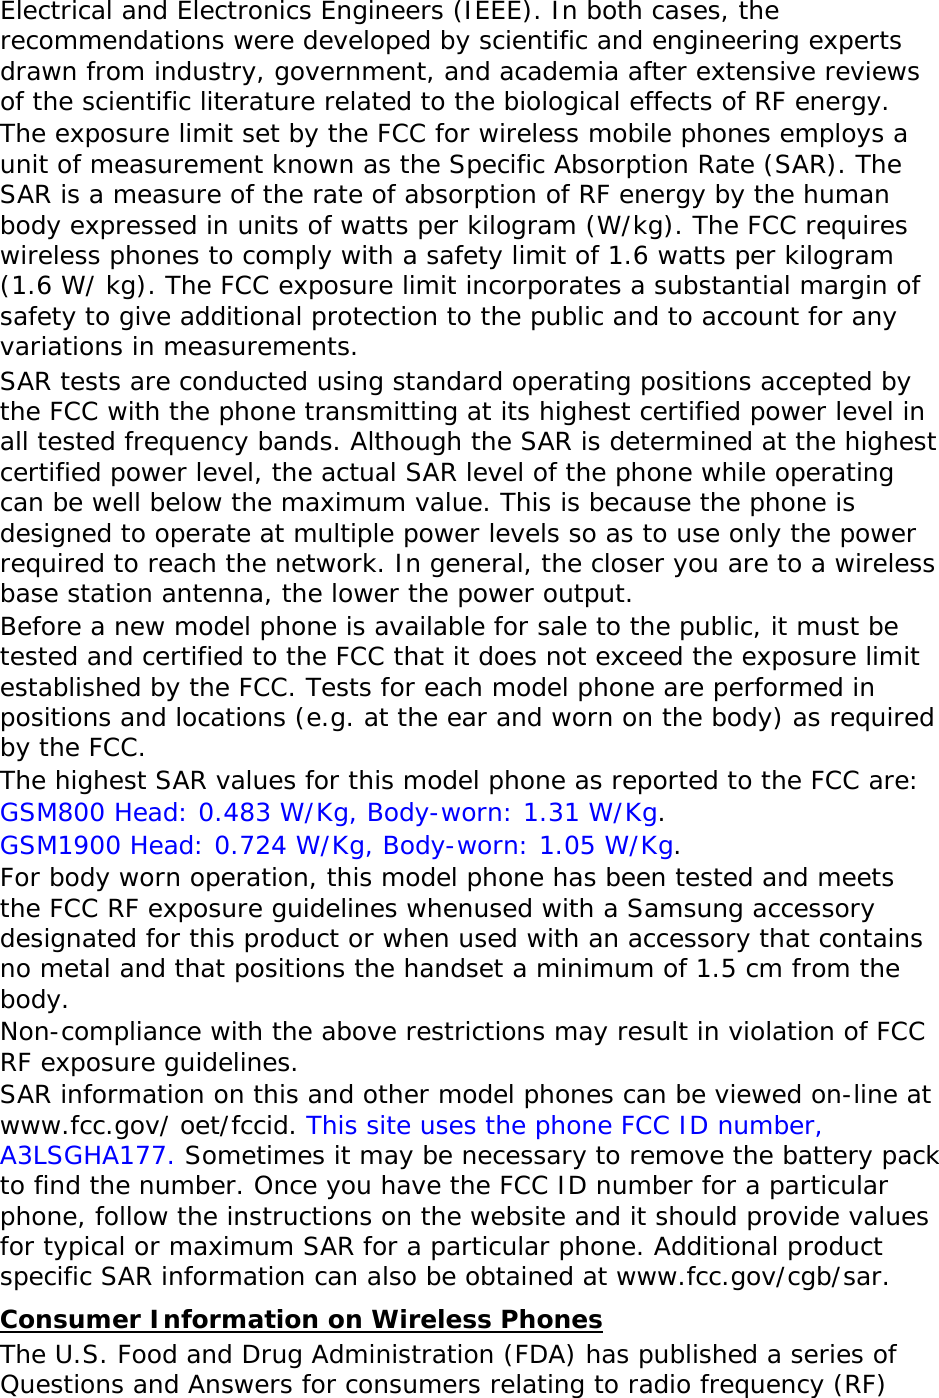   Electrical and Electronics Engineers (IEEE). In both cases, the recommendations were developed by scientific and engineering experts drawn from industry, government, and academia after extensive reviews of the scientific literature related to the biological effects of RF energy. The exposure limit set by the FCC for wireless mobile phones employs a unit of measurement known as the Specific Absorption Rate (SAR). The SAR is a measure of the rate of absorption of RF energy by the human body expressed in units of watts per kilogram (W/kg). The FCC requires wireless phones to comply with a safety limit of 1.6 watts per kilogram (1.6 W/ kg). The FCC exposure limit incorporates a substantial margin of safety to give additional protection to the public and to account for any variations in measurements. SAR tests are conducted using standard operating positions accepted by the FCC with the phone transmitting at its highest certified power level in all tested frequency bands. Although the SAR is determined at the highest certified power level, the actual SAR level of the phone while operating can be well below the maximum value. This is because the phone is designed to operate at multiple power levels so as to use only the power required to reach the network. In general, the closer you are to a wireless base station antenna, the lower the power output. Before a new model phone is available for sale to the public, it must be tested and certified to the FCC that it does not exceed the exposure limit established by the FCC. Tests for each model phone are performed in positions and locations (e.g. at the ear and worn on the body) as required by the FCC.   The highest SAR values for this model phone as reported to the FCC are:  GSM800 Head: 0.483 W/Kg, Body-worn: 1.31 W/Kg. GSM1900 Head: 0.724 W/Kg, Body-worn: 1.05 W/Kg. For body worn operation, this model phone has been tested and meets the FCC RF exposure guidelines whenused with a Samsung accessory designated for this product or when used with an accessory that contains no metal and that positions the handset a minimum of 1.5 cm from the body.  Non-compliance with the above restrictions may result in violation of FCC RF exposure guidelines. SAR information on this and other model phones can be viewed on-line at www.fcc.gov/ oet/fccid. This site uses the phone FCC ID number, A3LSGHA177. Sometimes it may be necessary to remove the battery pack to find the number. Once you have the FCC ID number for a particular phone, follow the instructions on the website and it should provide values for typical or maximum SAR for a particular phone. Additional product specific SAR information can also be obtained at www.fcc.gov/cgb/sar. Consumer Information on Wireless Phones The U.S. Food and Drug Administration (FDA) has published a series of Questions and Answers for consumers relating to radio frequency (RF) 